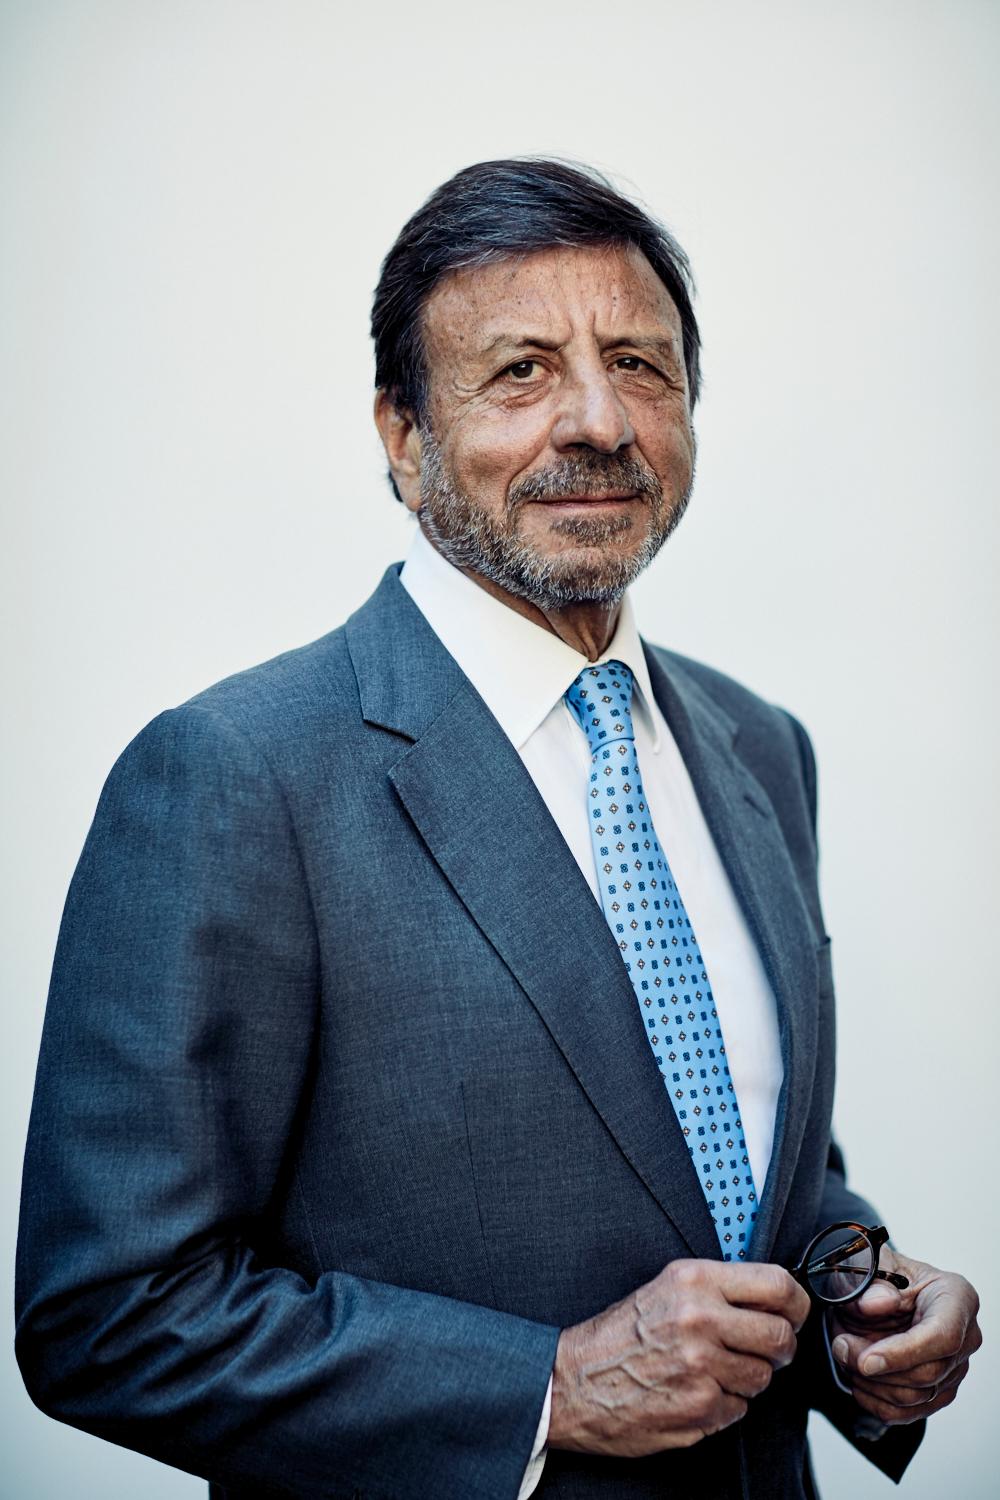 Sir Rocco Forte is a British hotelier, philanthropist and chair of Rocco Forte hotels / 